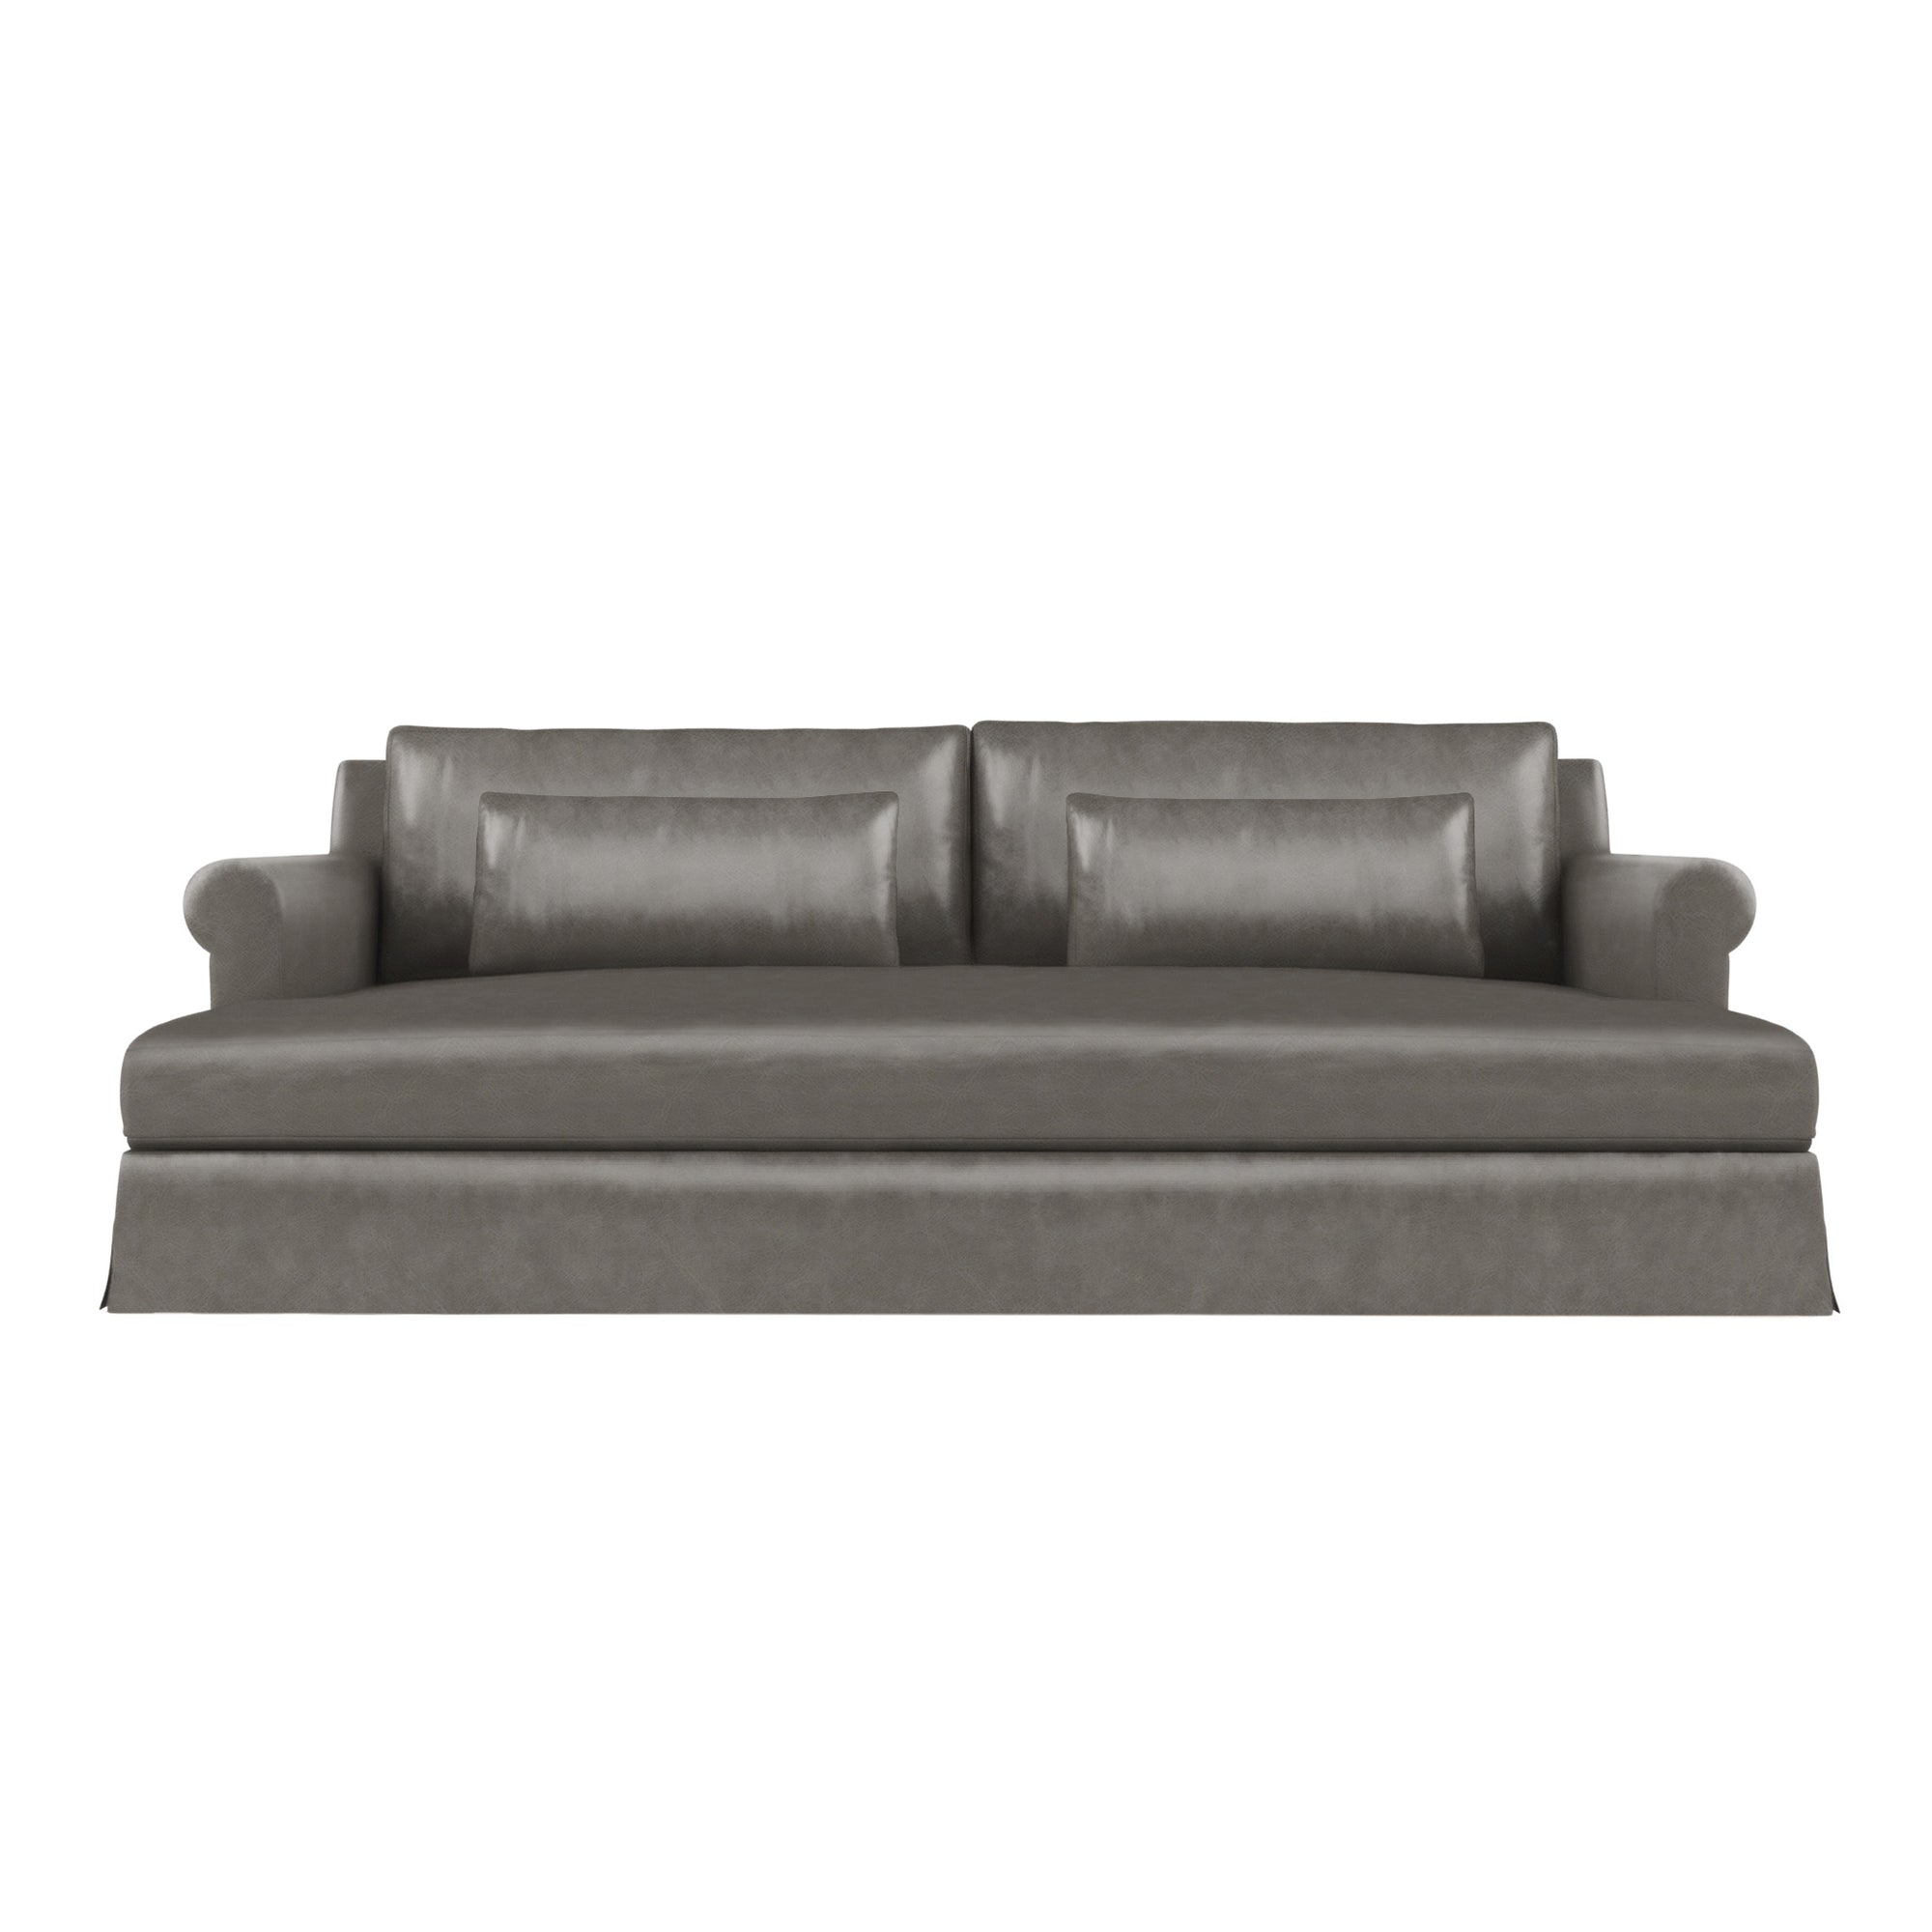 Ludlow Daybed - Pumice Vintage Leather